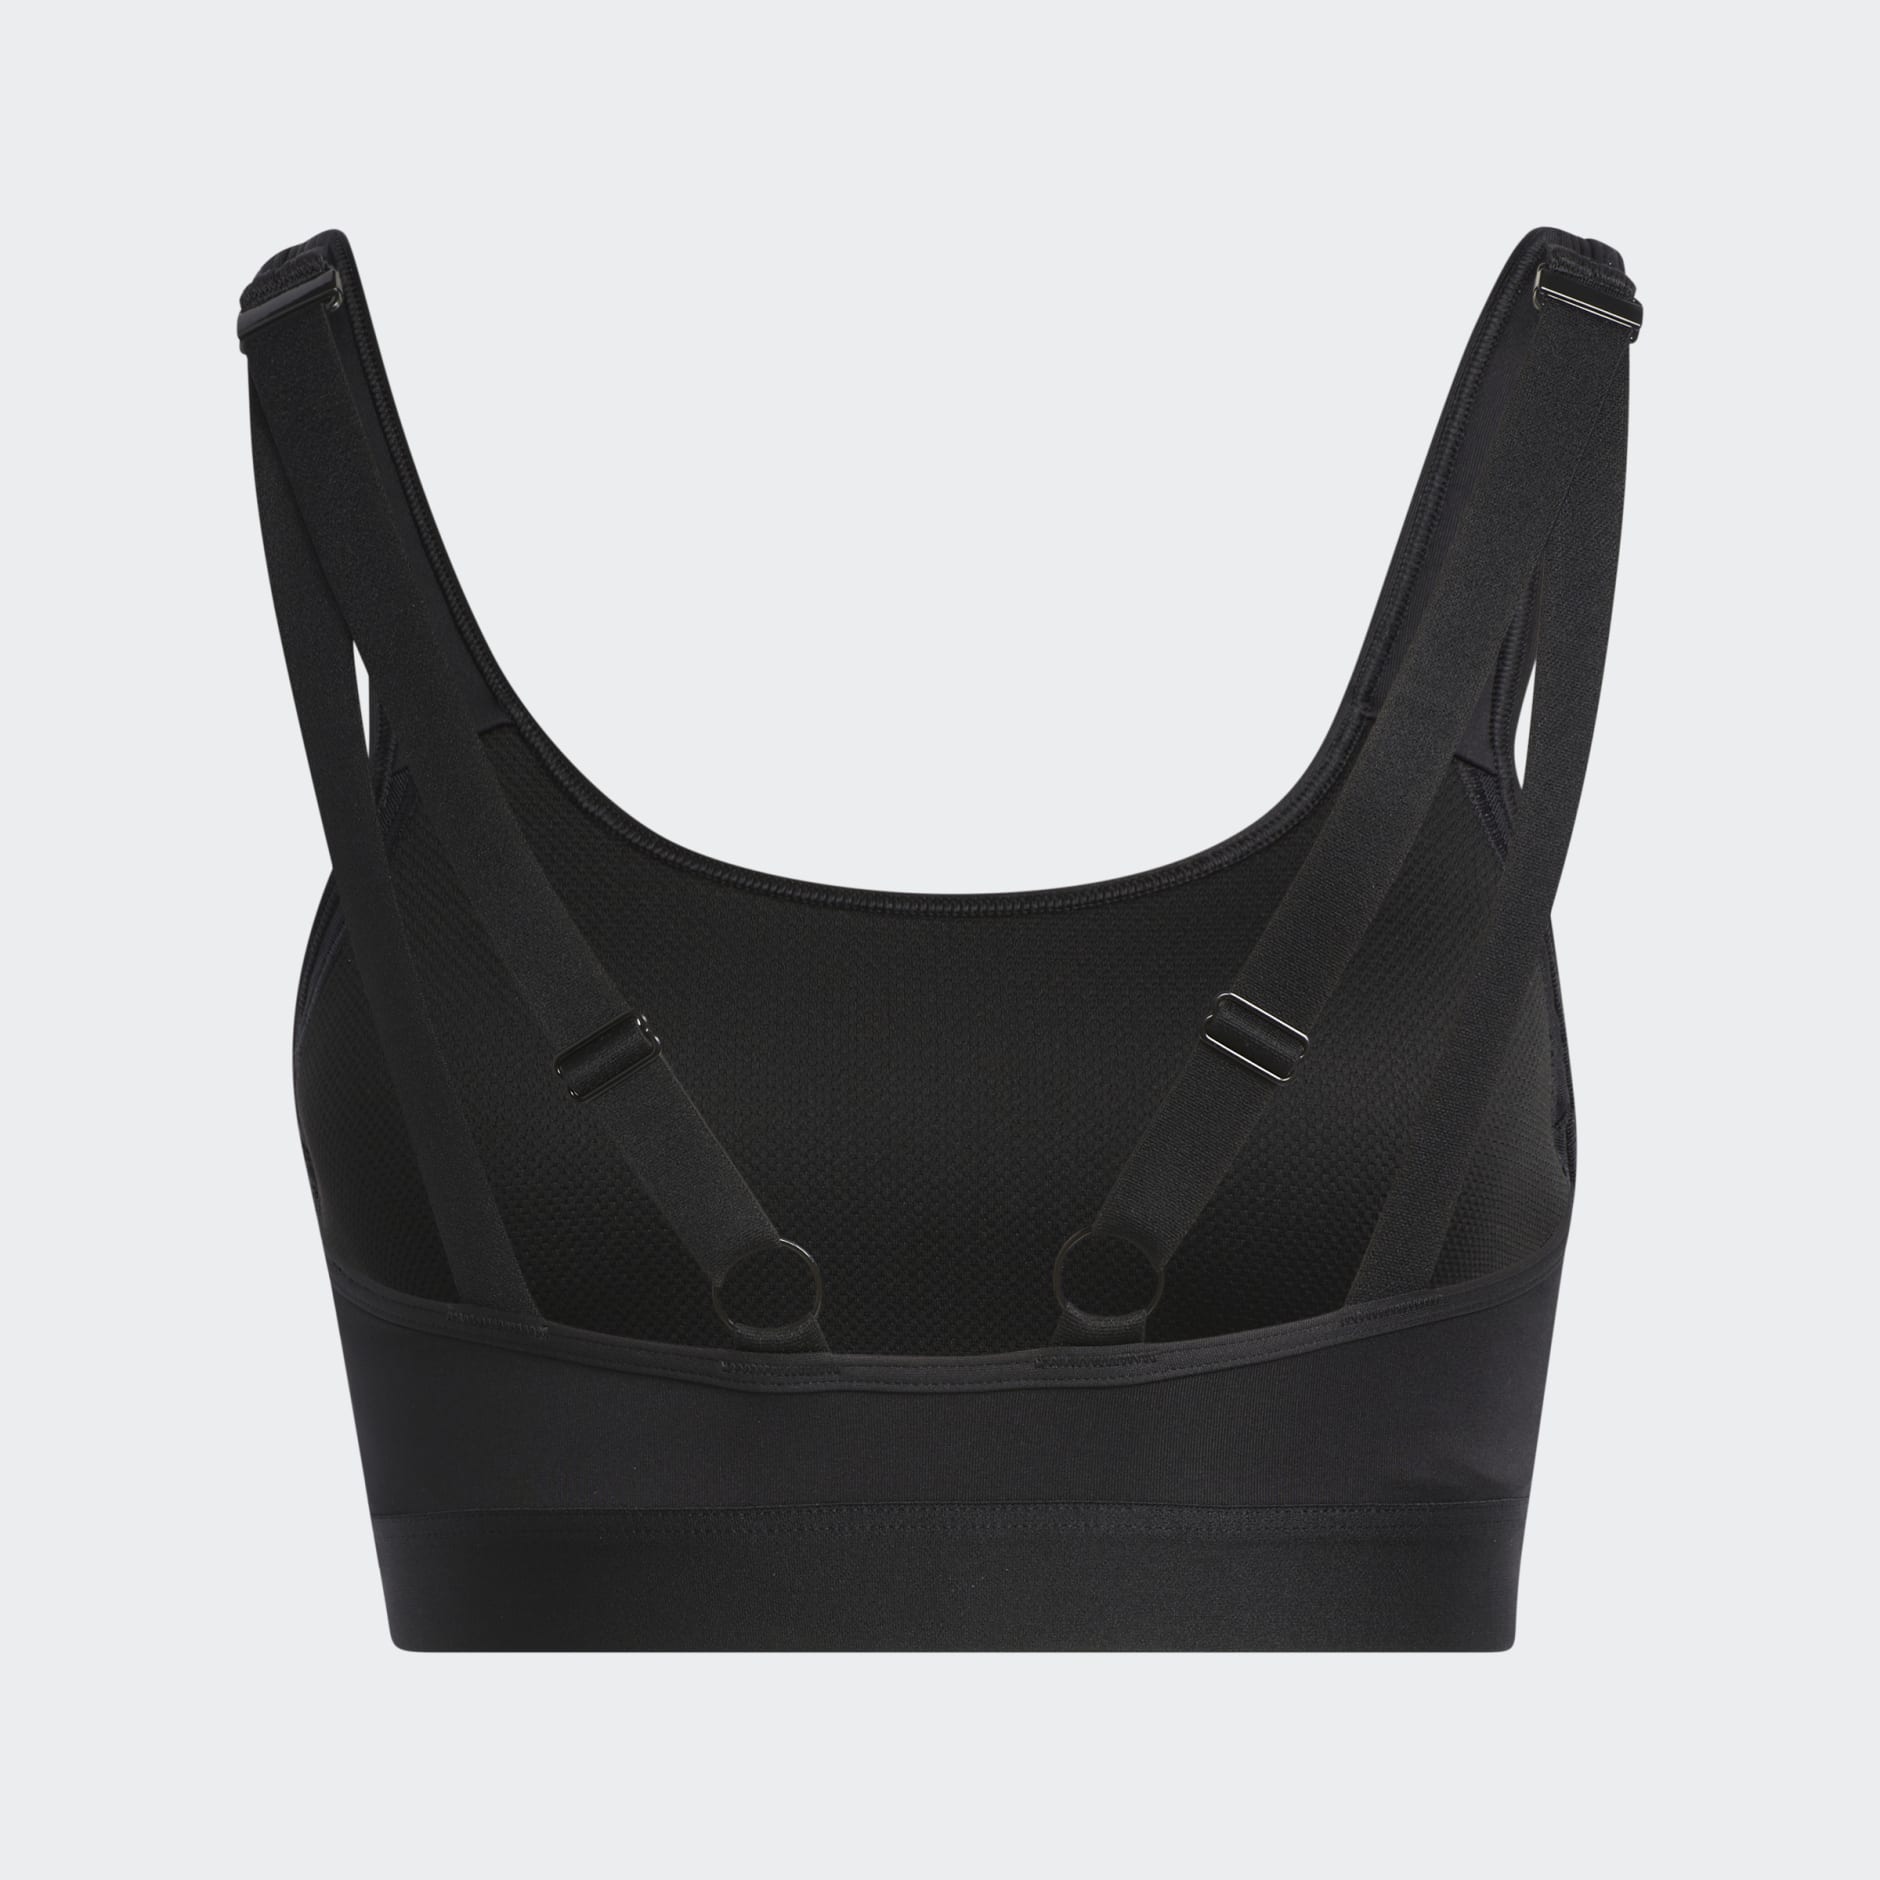 adidas Brassière adidas TLRD Move Training Maintien fort - JD Sports France